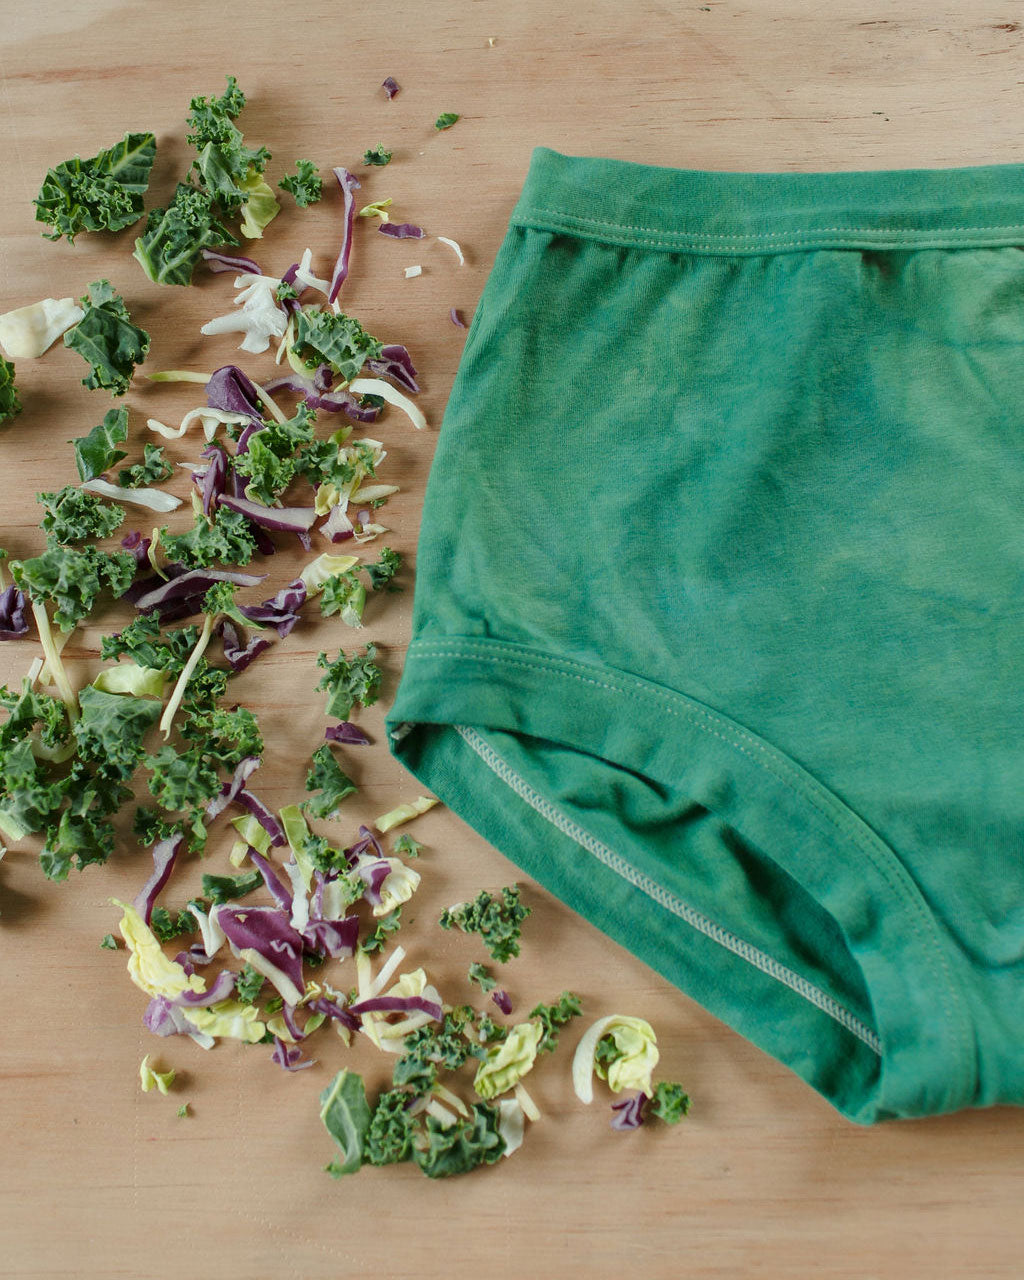 Flat lay of Thunderpants Organic Cotton hand dye Emerald with kale around.